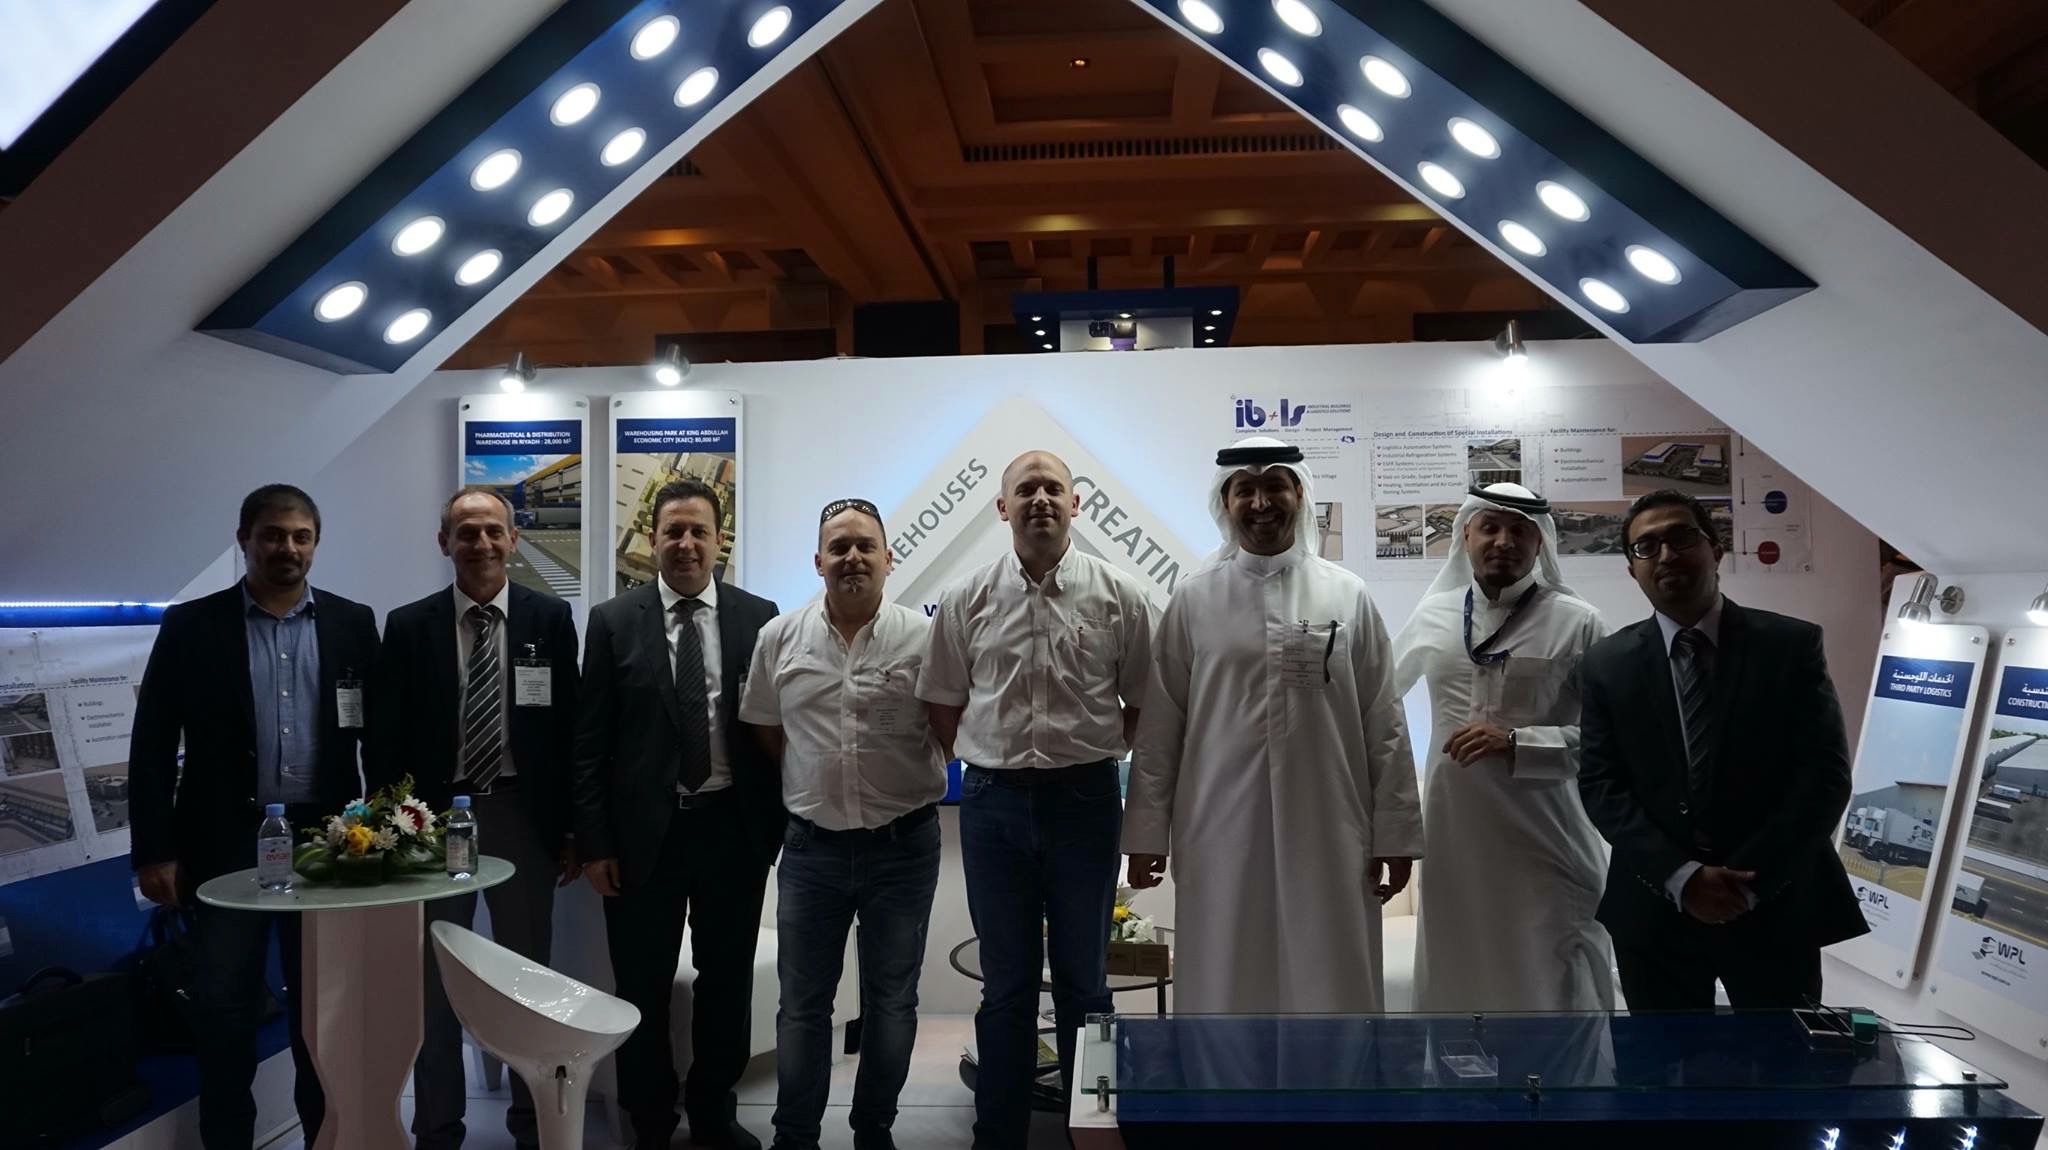 CoGri Middle East & Osis Group at MH Saudi Arabia 2016